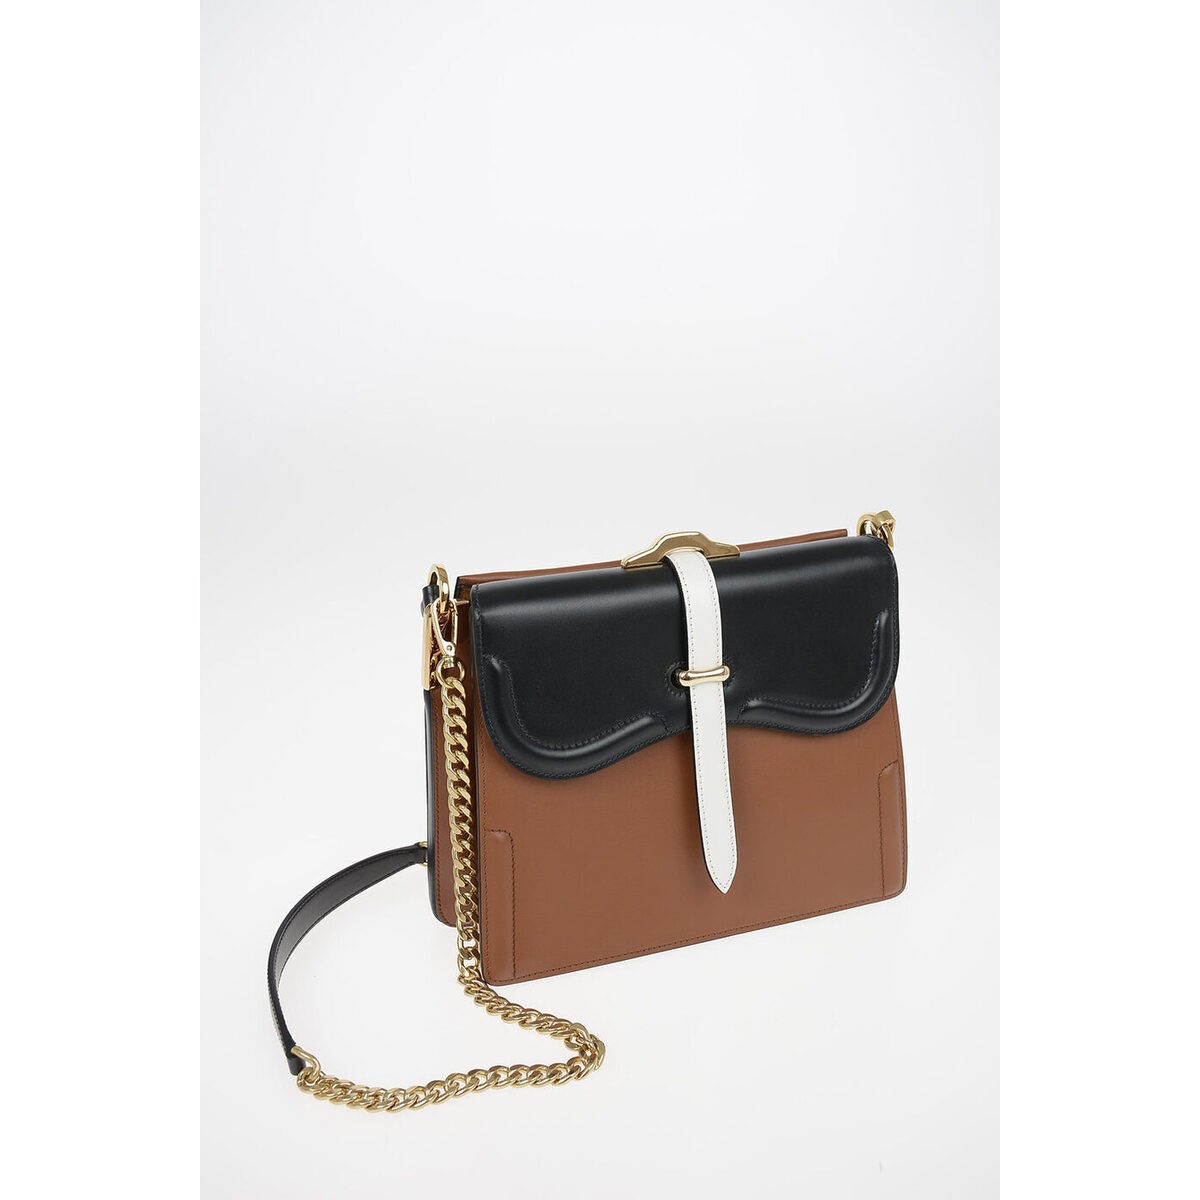 PRADA/プラダ Brown レディース Leather Top Handle CITY Bag with Removable Shoulder Chain dk